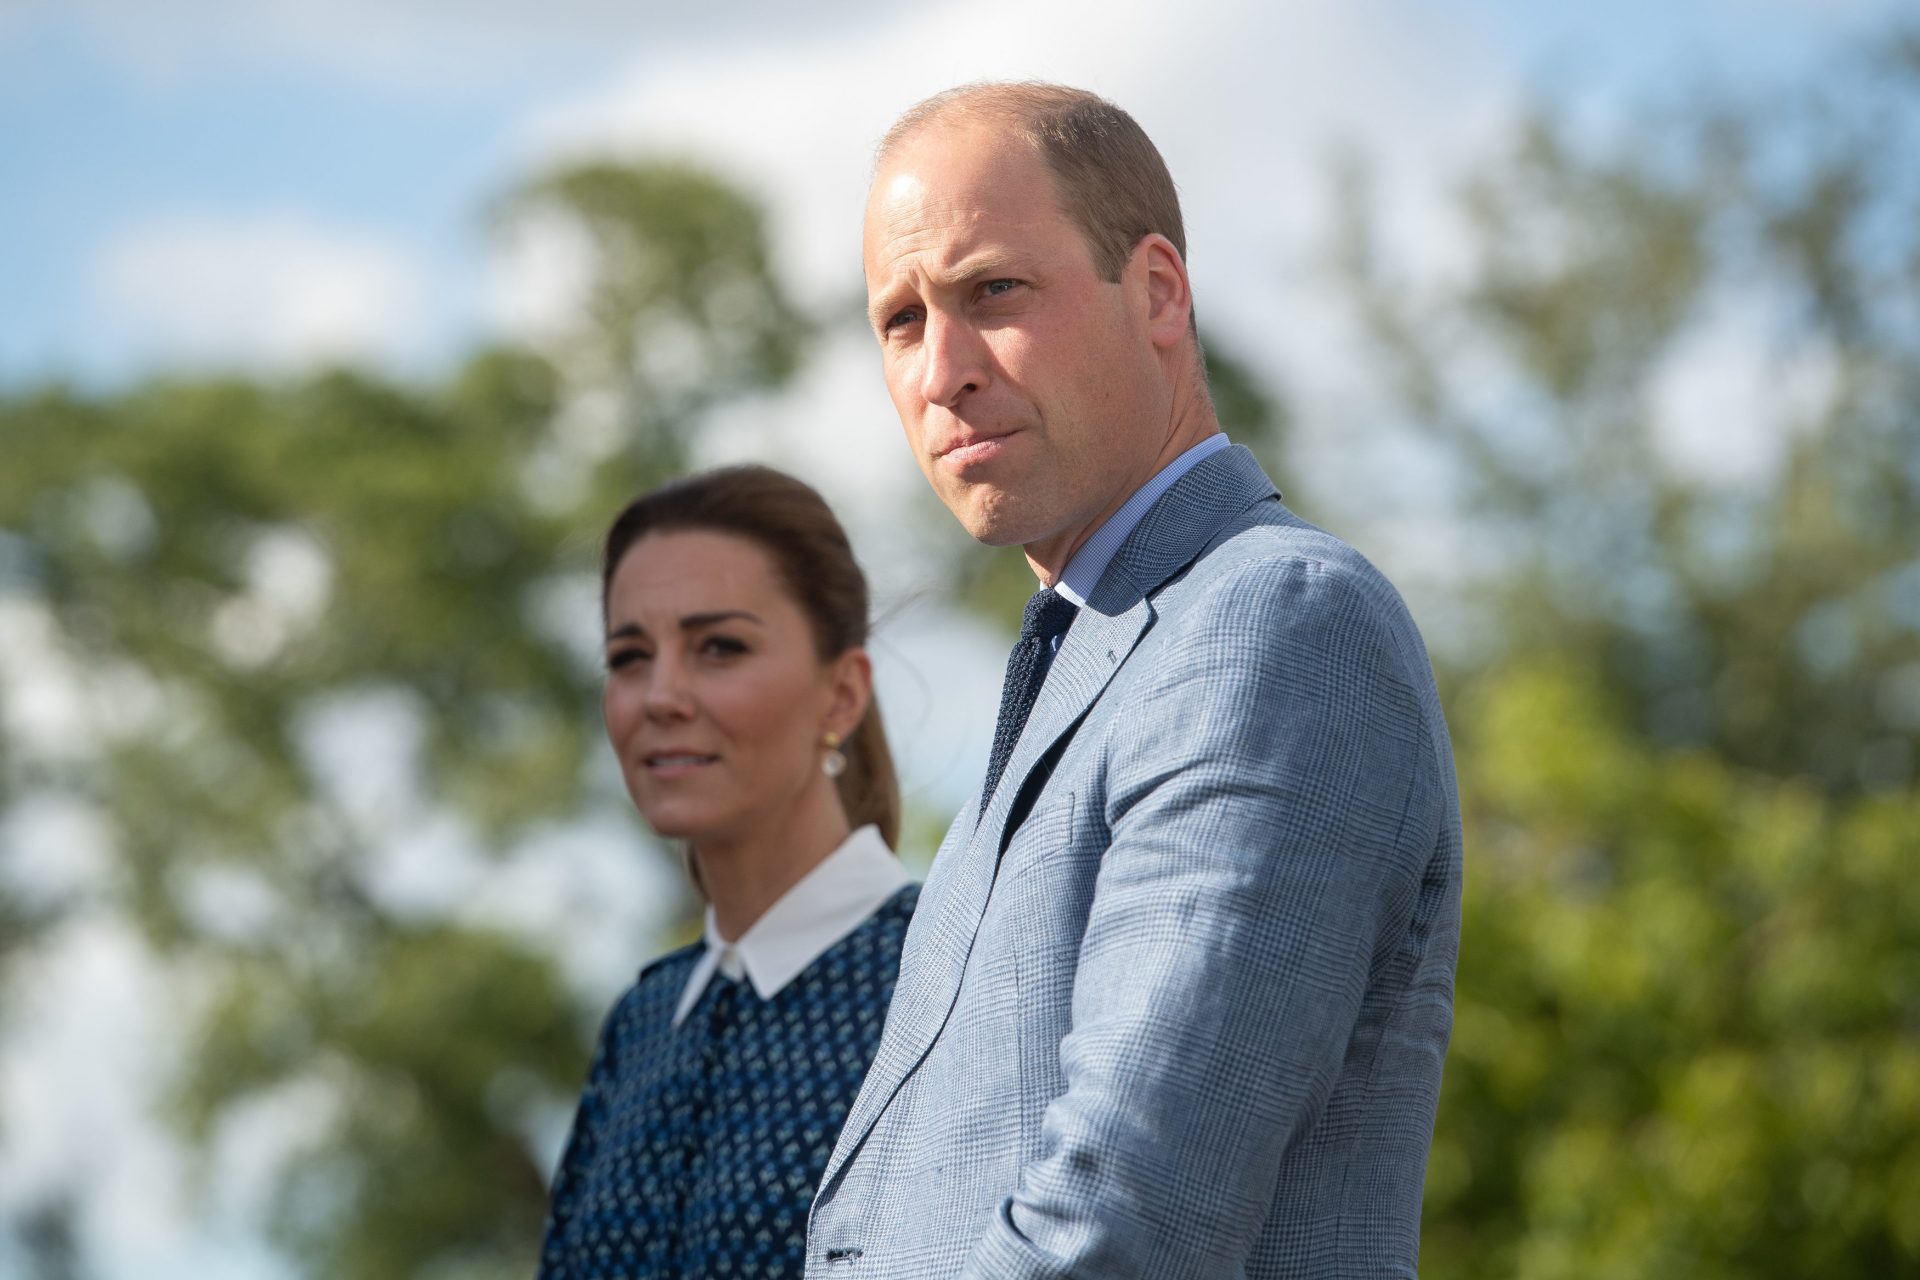 What happened to Prince William? Take two